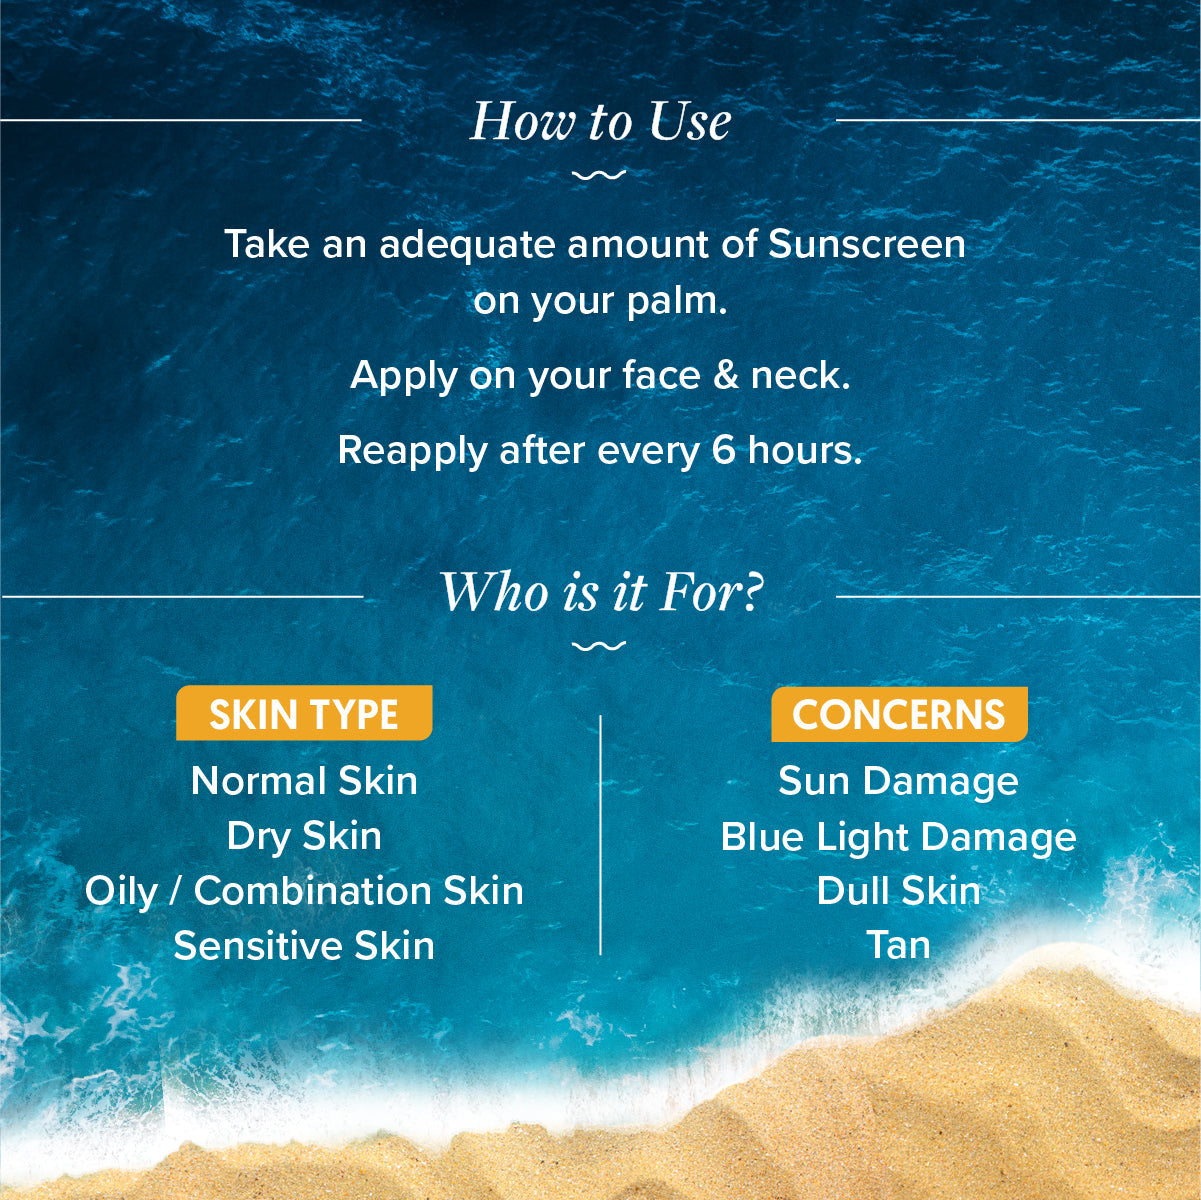 FREEBIE | Glow+ Dewy Sunscreen with SPF 50+ & PA++++ for UVA/B & Blue Light Protection & No White Cast - 80g